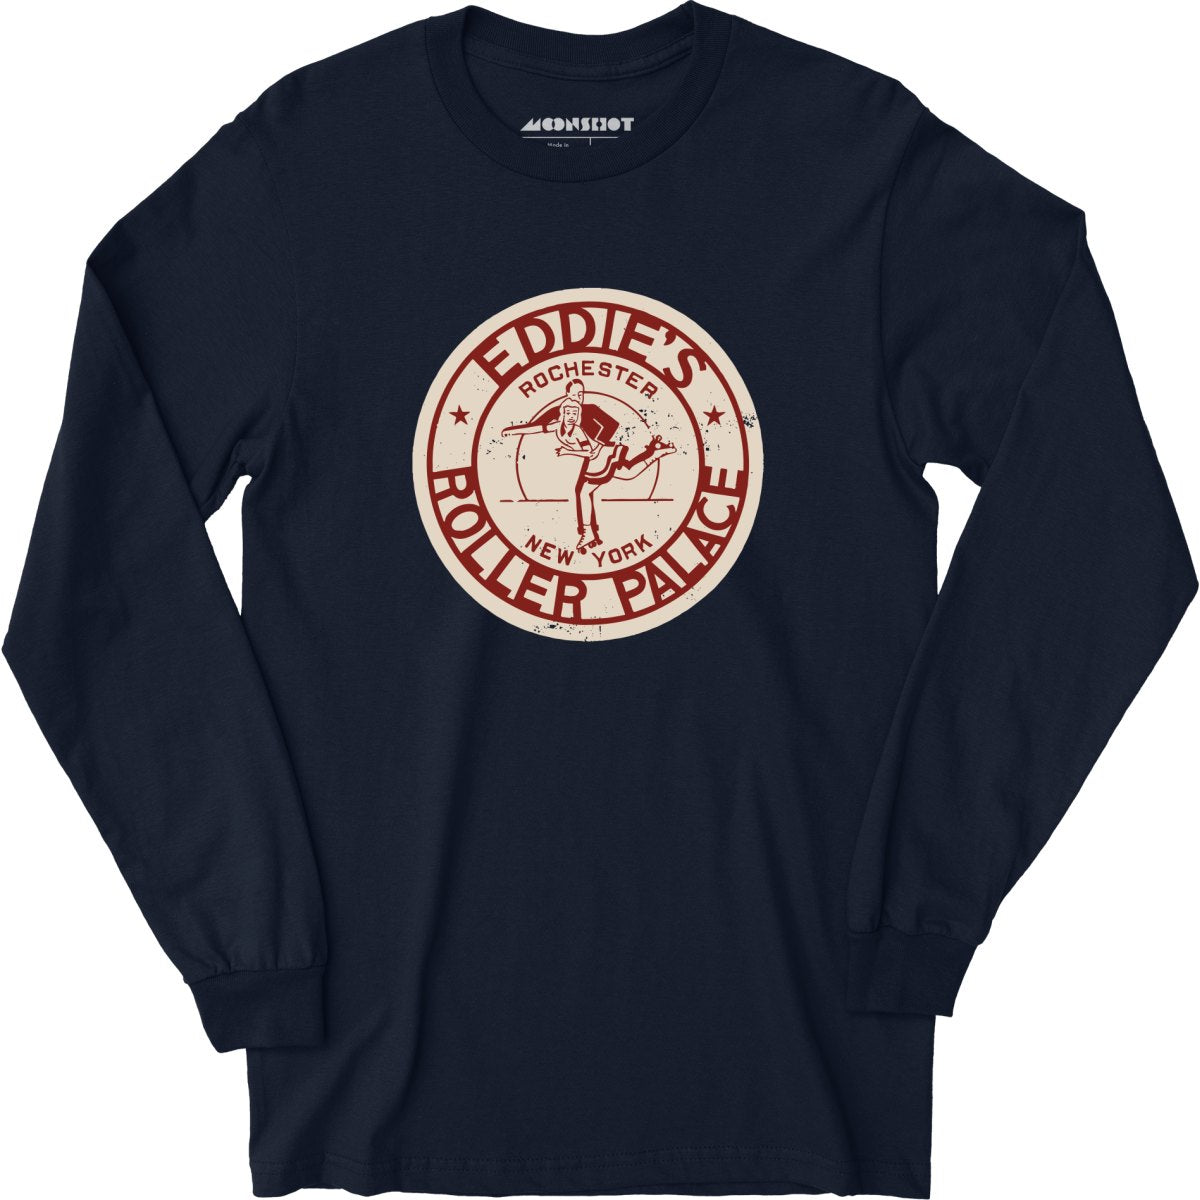 Eddie's Roller Palace - Rochester, NY - Vintage Roller Rink - Long Sleeve T-Shirt